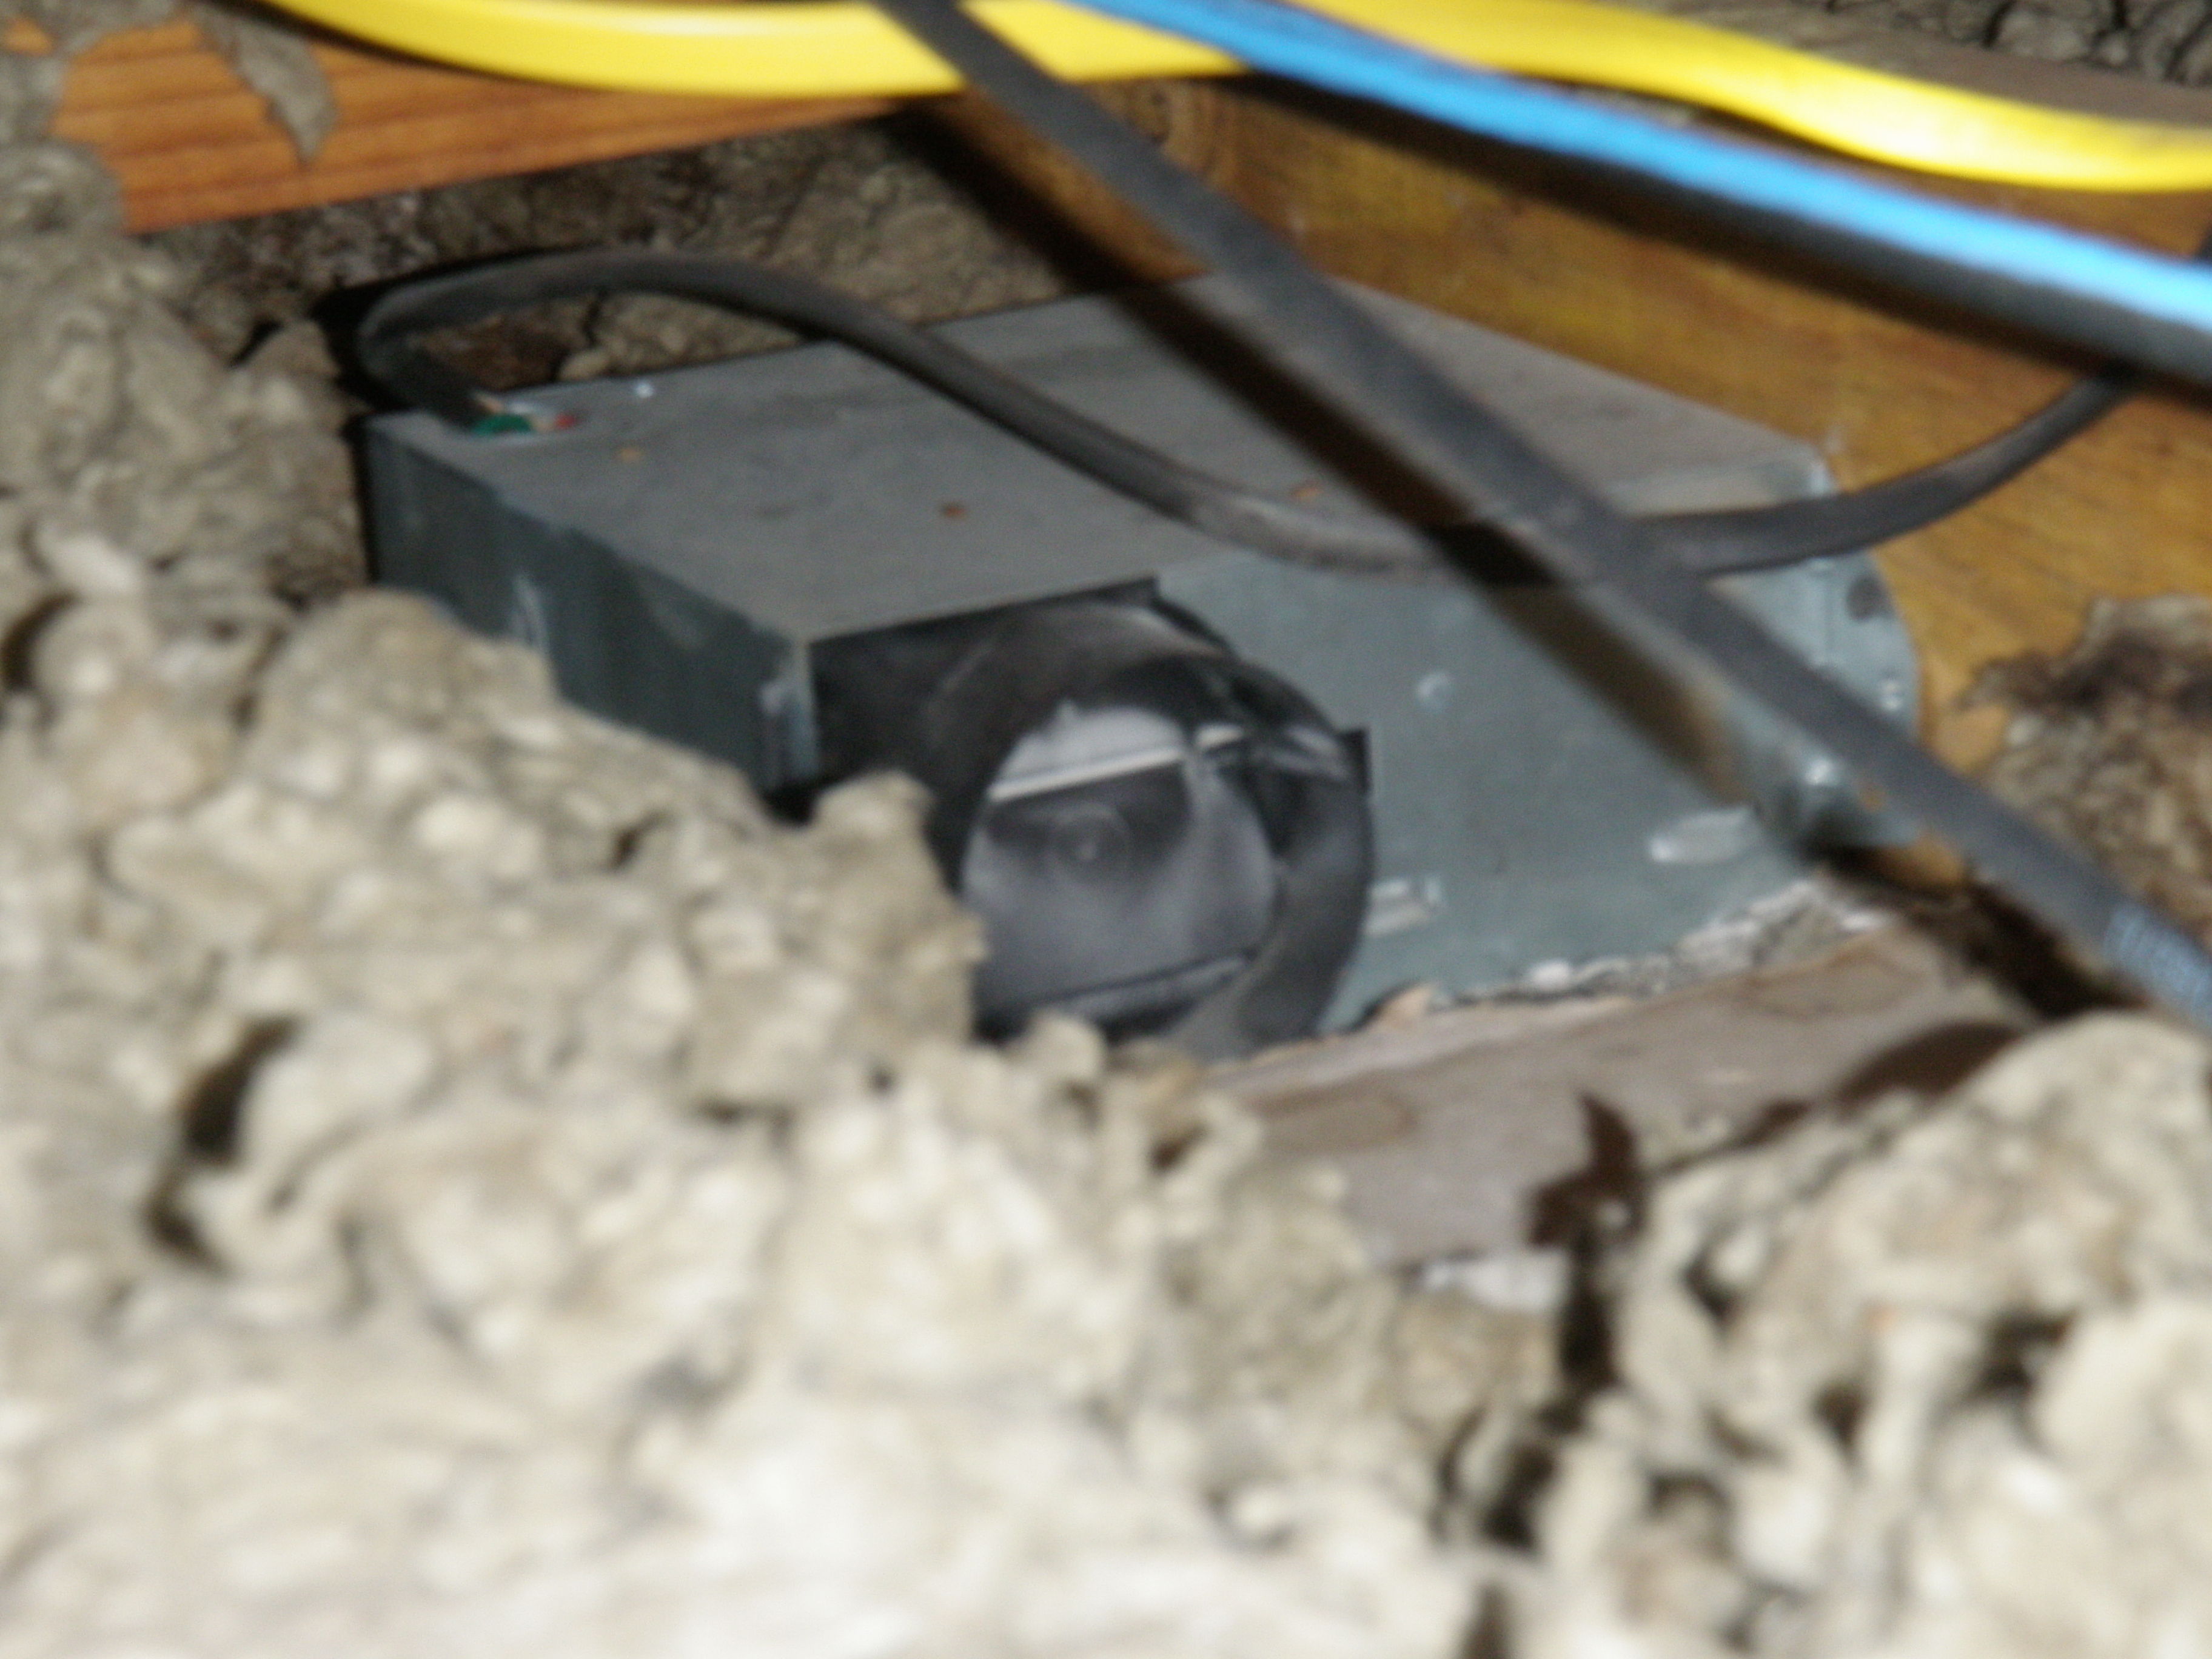 ATTIC MOLD? WATCH OUT FOR BATHROOM FANS AND ATTIC VENTILATION